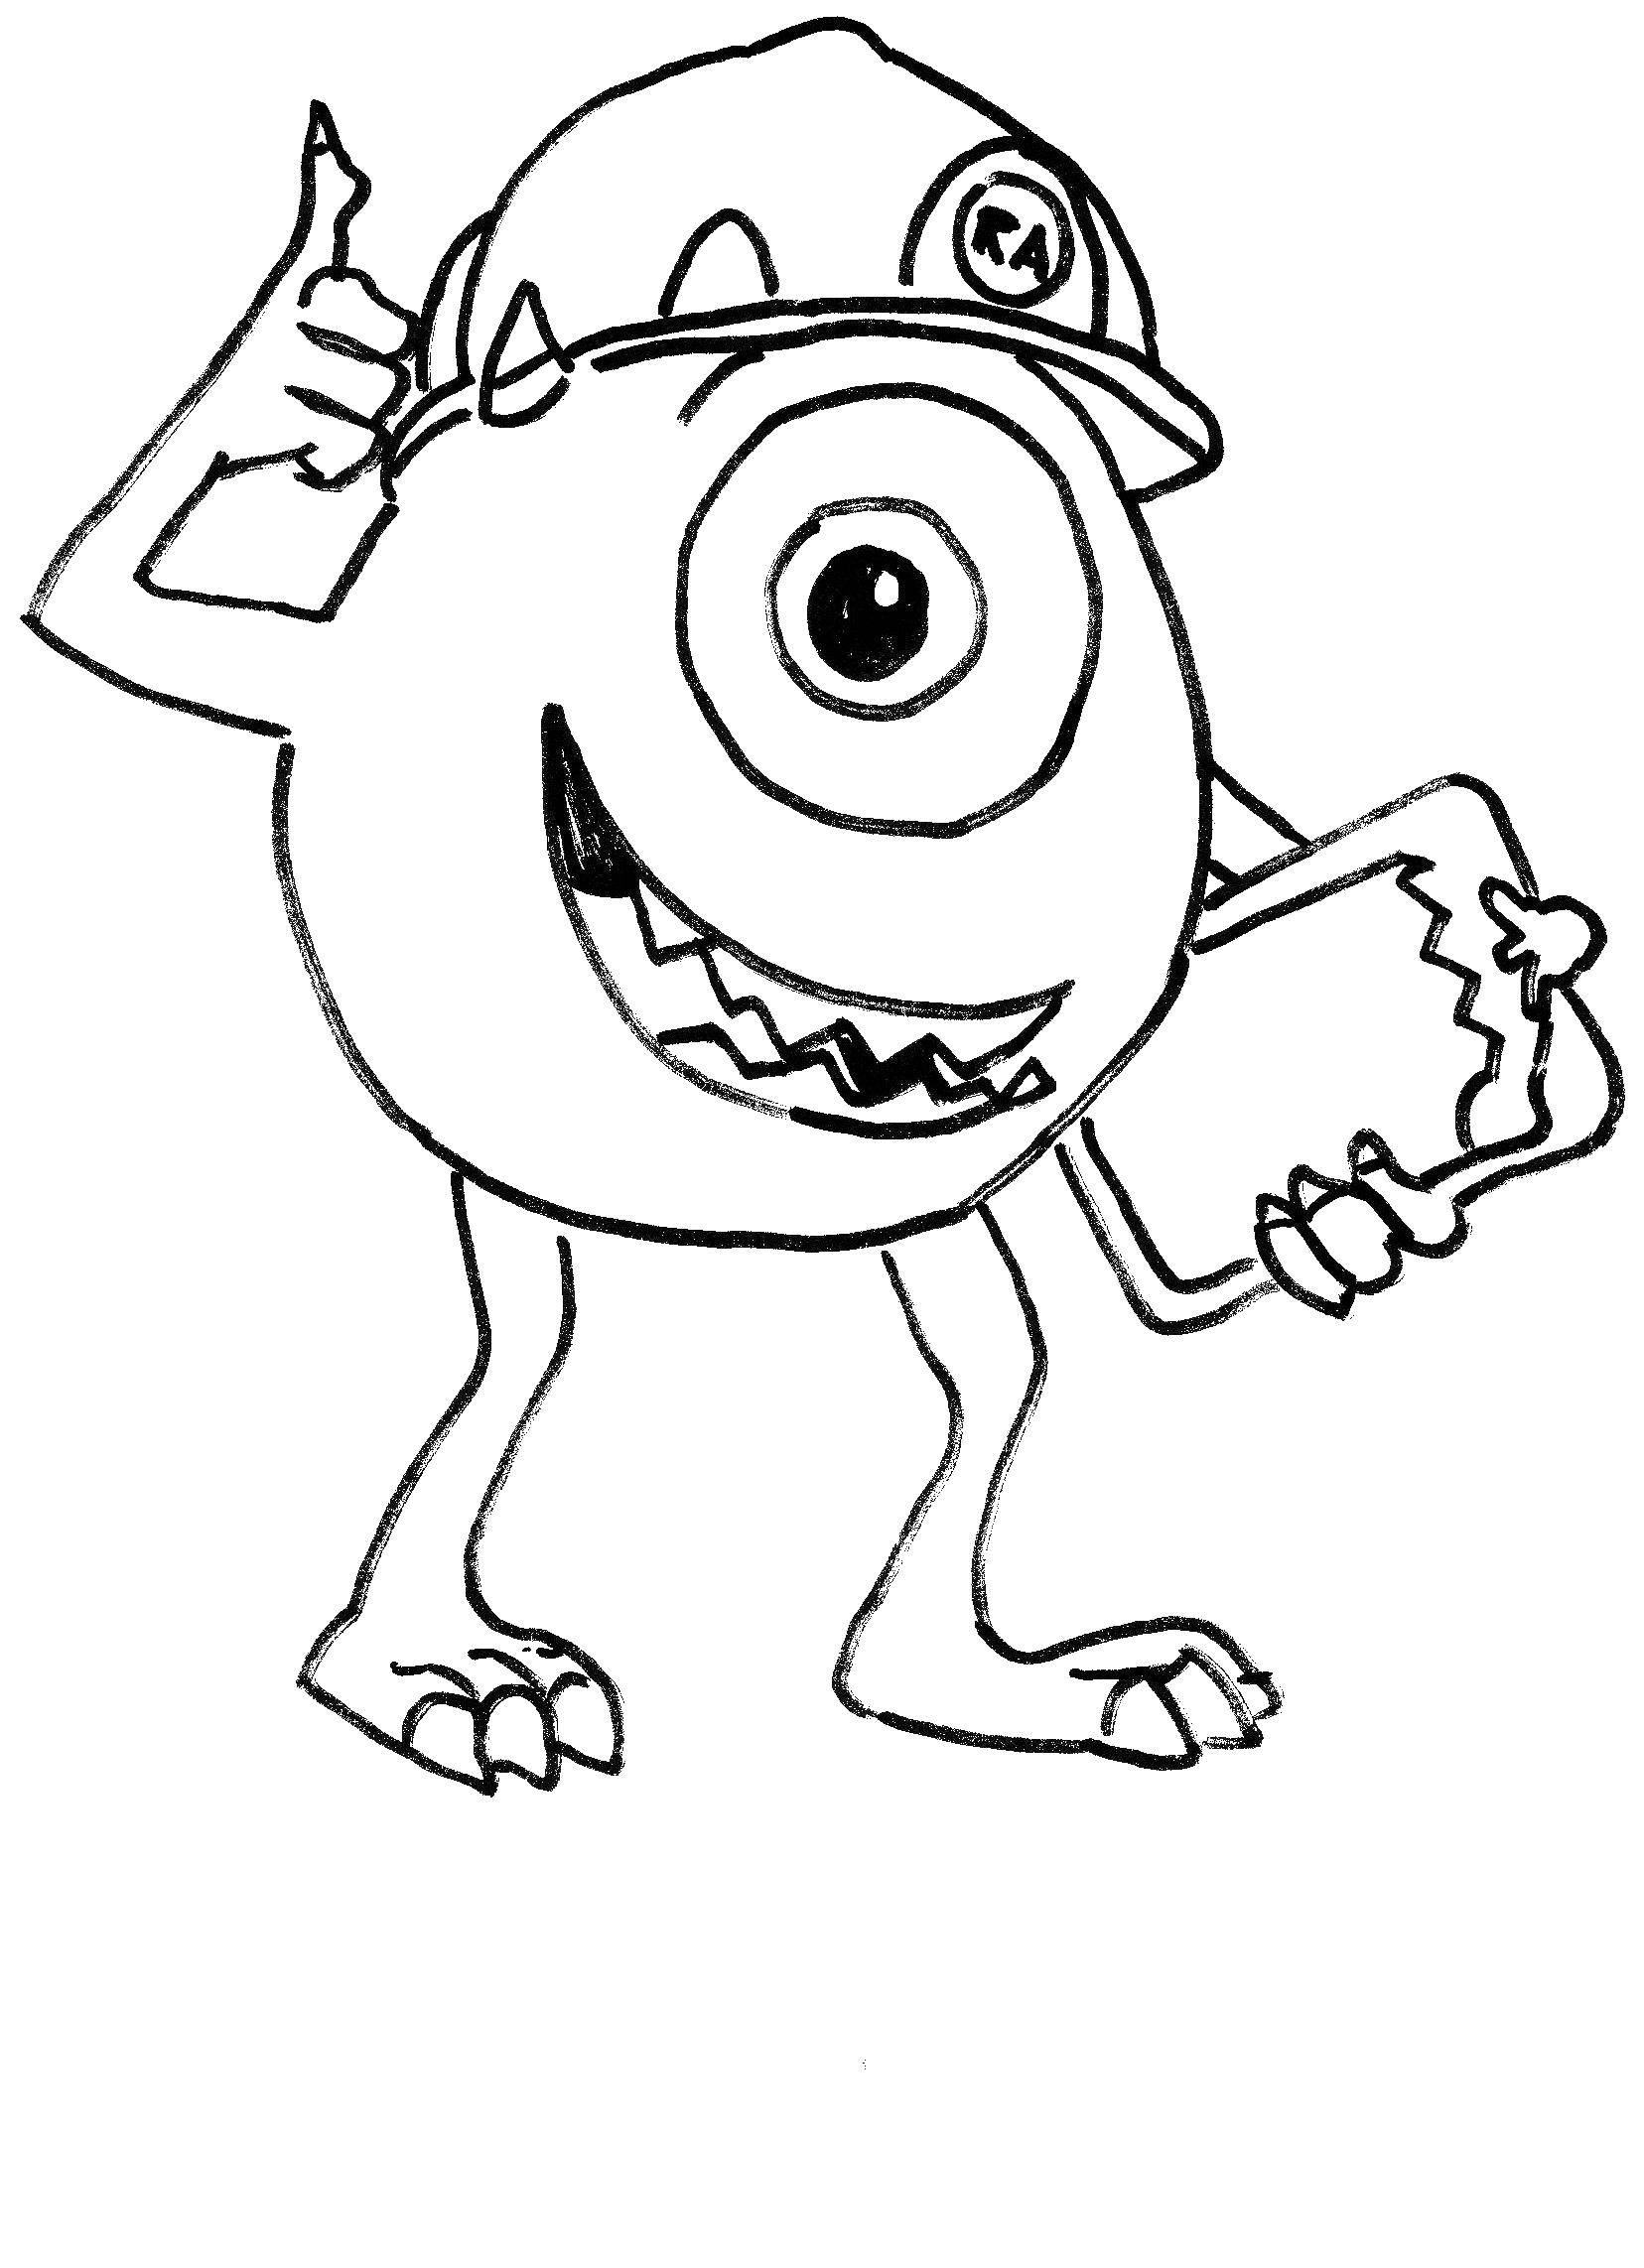 Coloring Mike wazowski. Category coloring monsters Inc. Tags:  monsters Inc, Mike, Sulley.